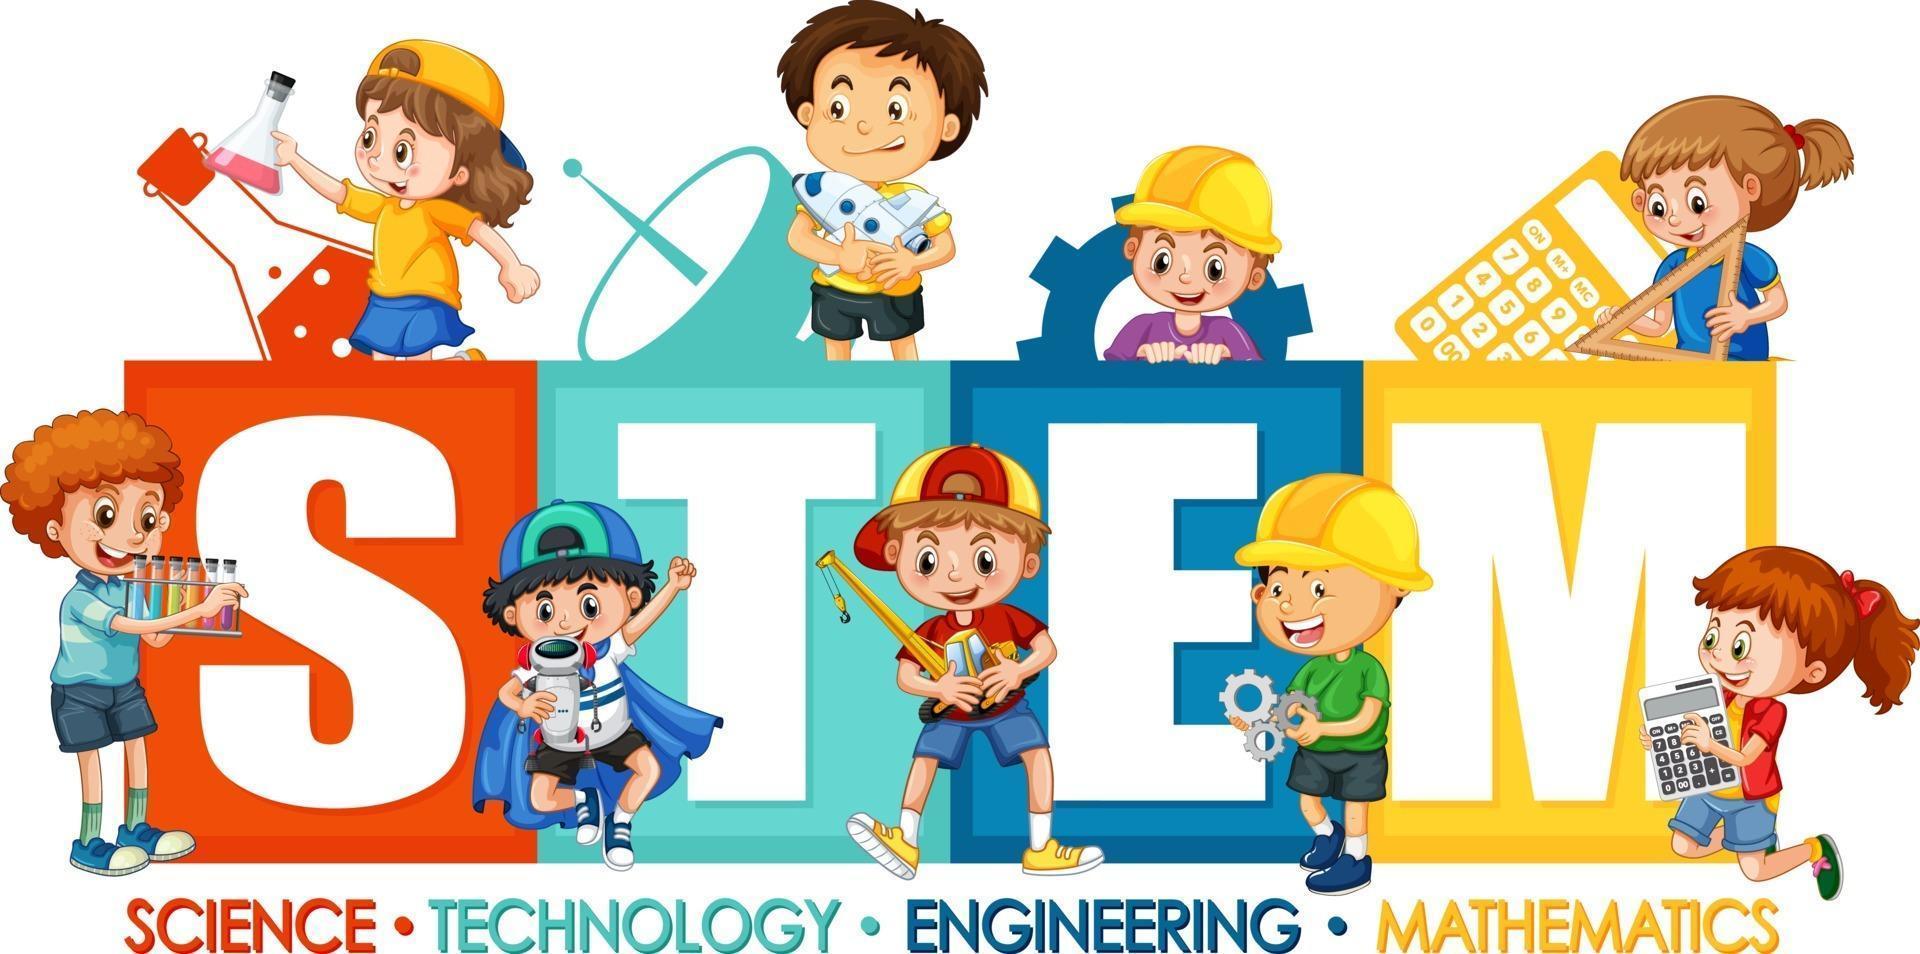 STEM education logo with many children cartoon character vector